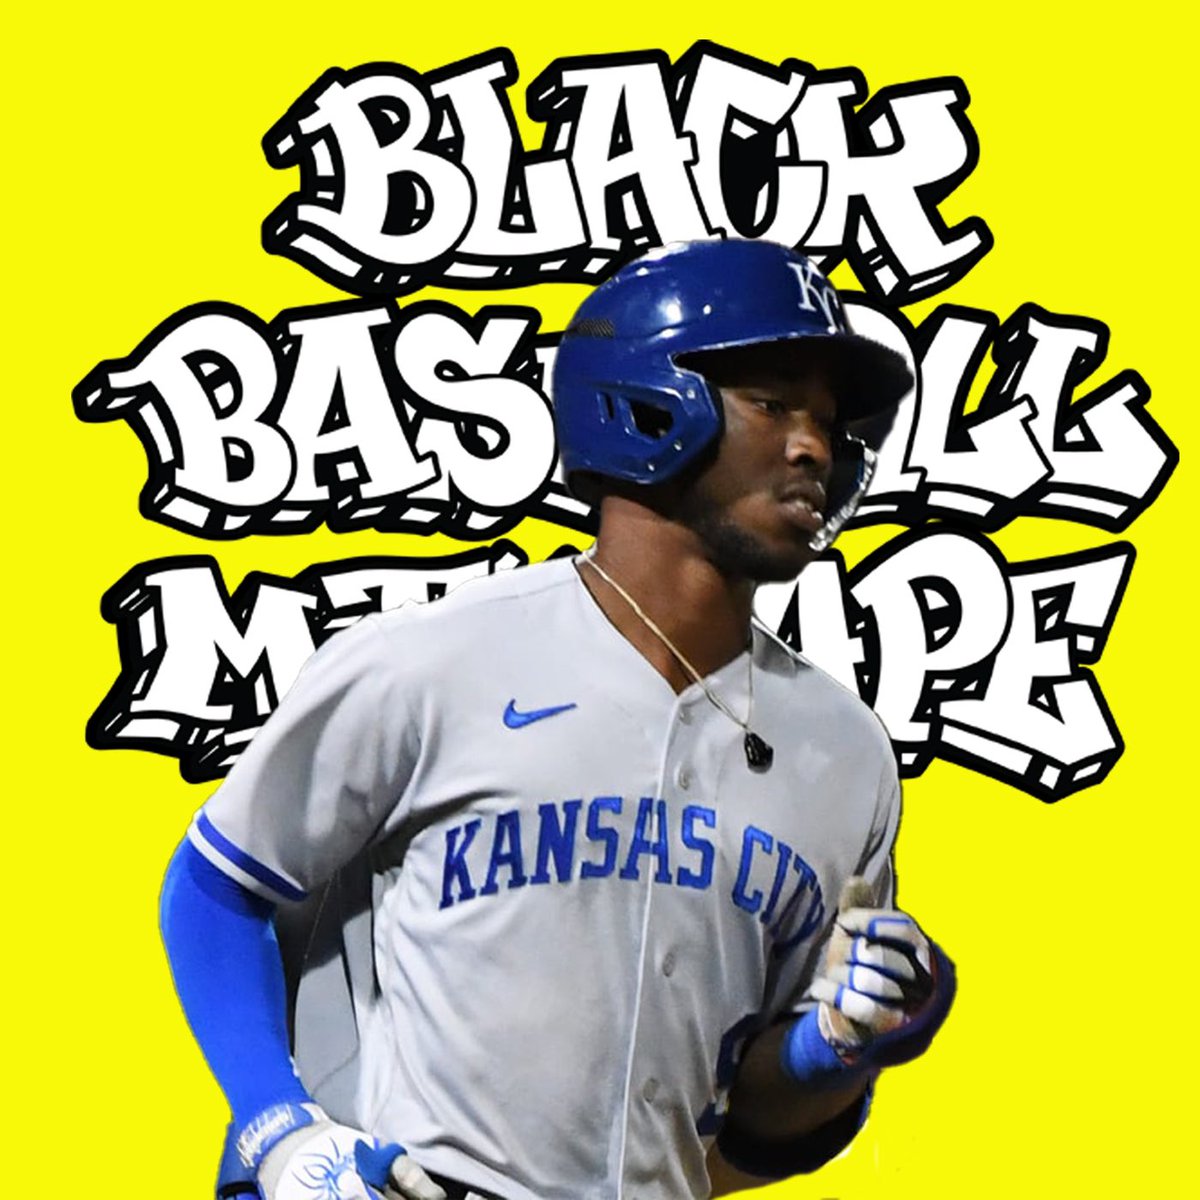 I’m so excited that Royals IF/OF @SamadTaylor7 is the first pro player to join us for an episode of Mixtape Talk. Please subscribe to the Black Baseball Mixtape podcast for this great episode and many more. #Blackbaseball